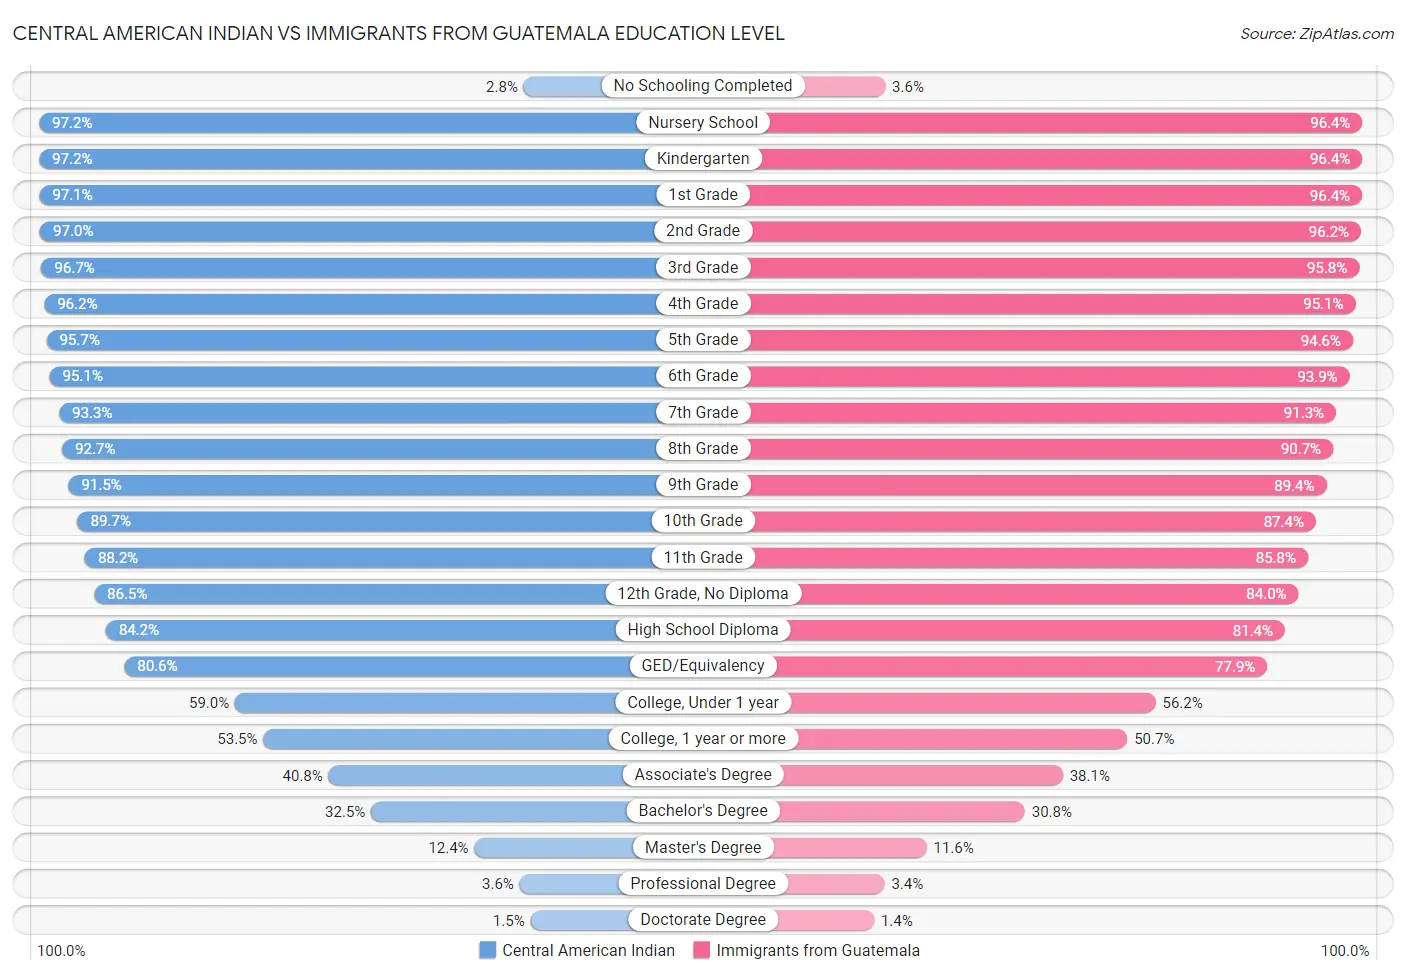 Central American Indian vs Immigrants from Guatemala Education Level